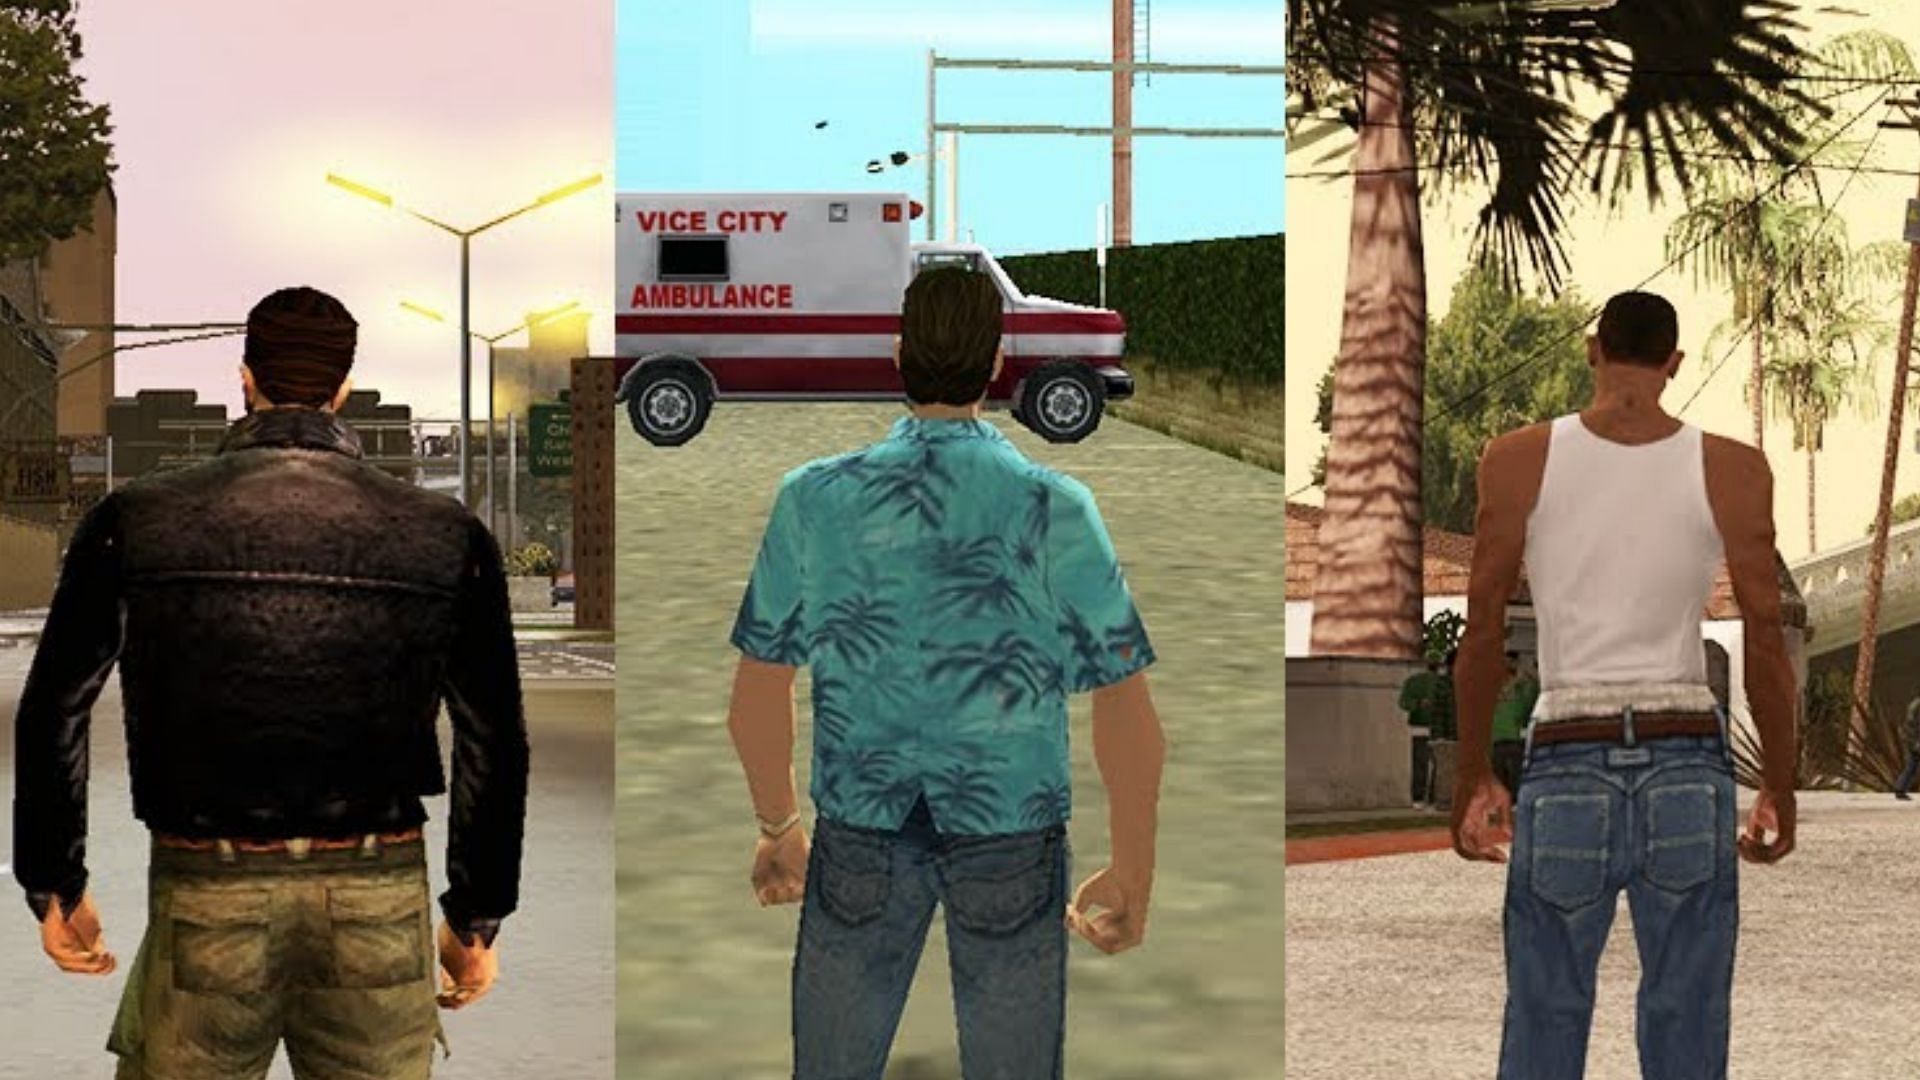 🔥 GTA SAN ANDREAS LITE AND COMPLETE FOR ANDROID!! (UPDATED 2023) 